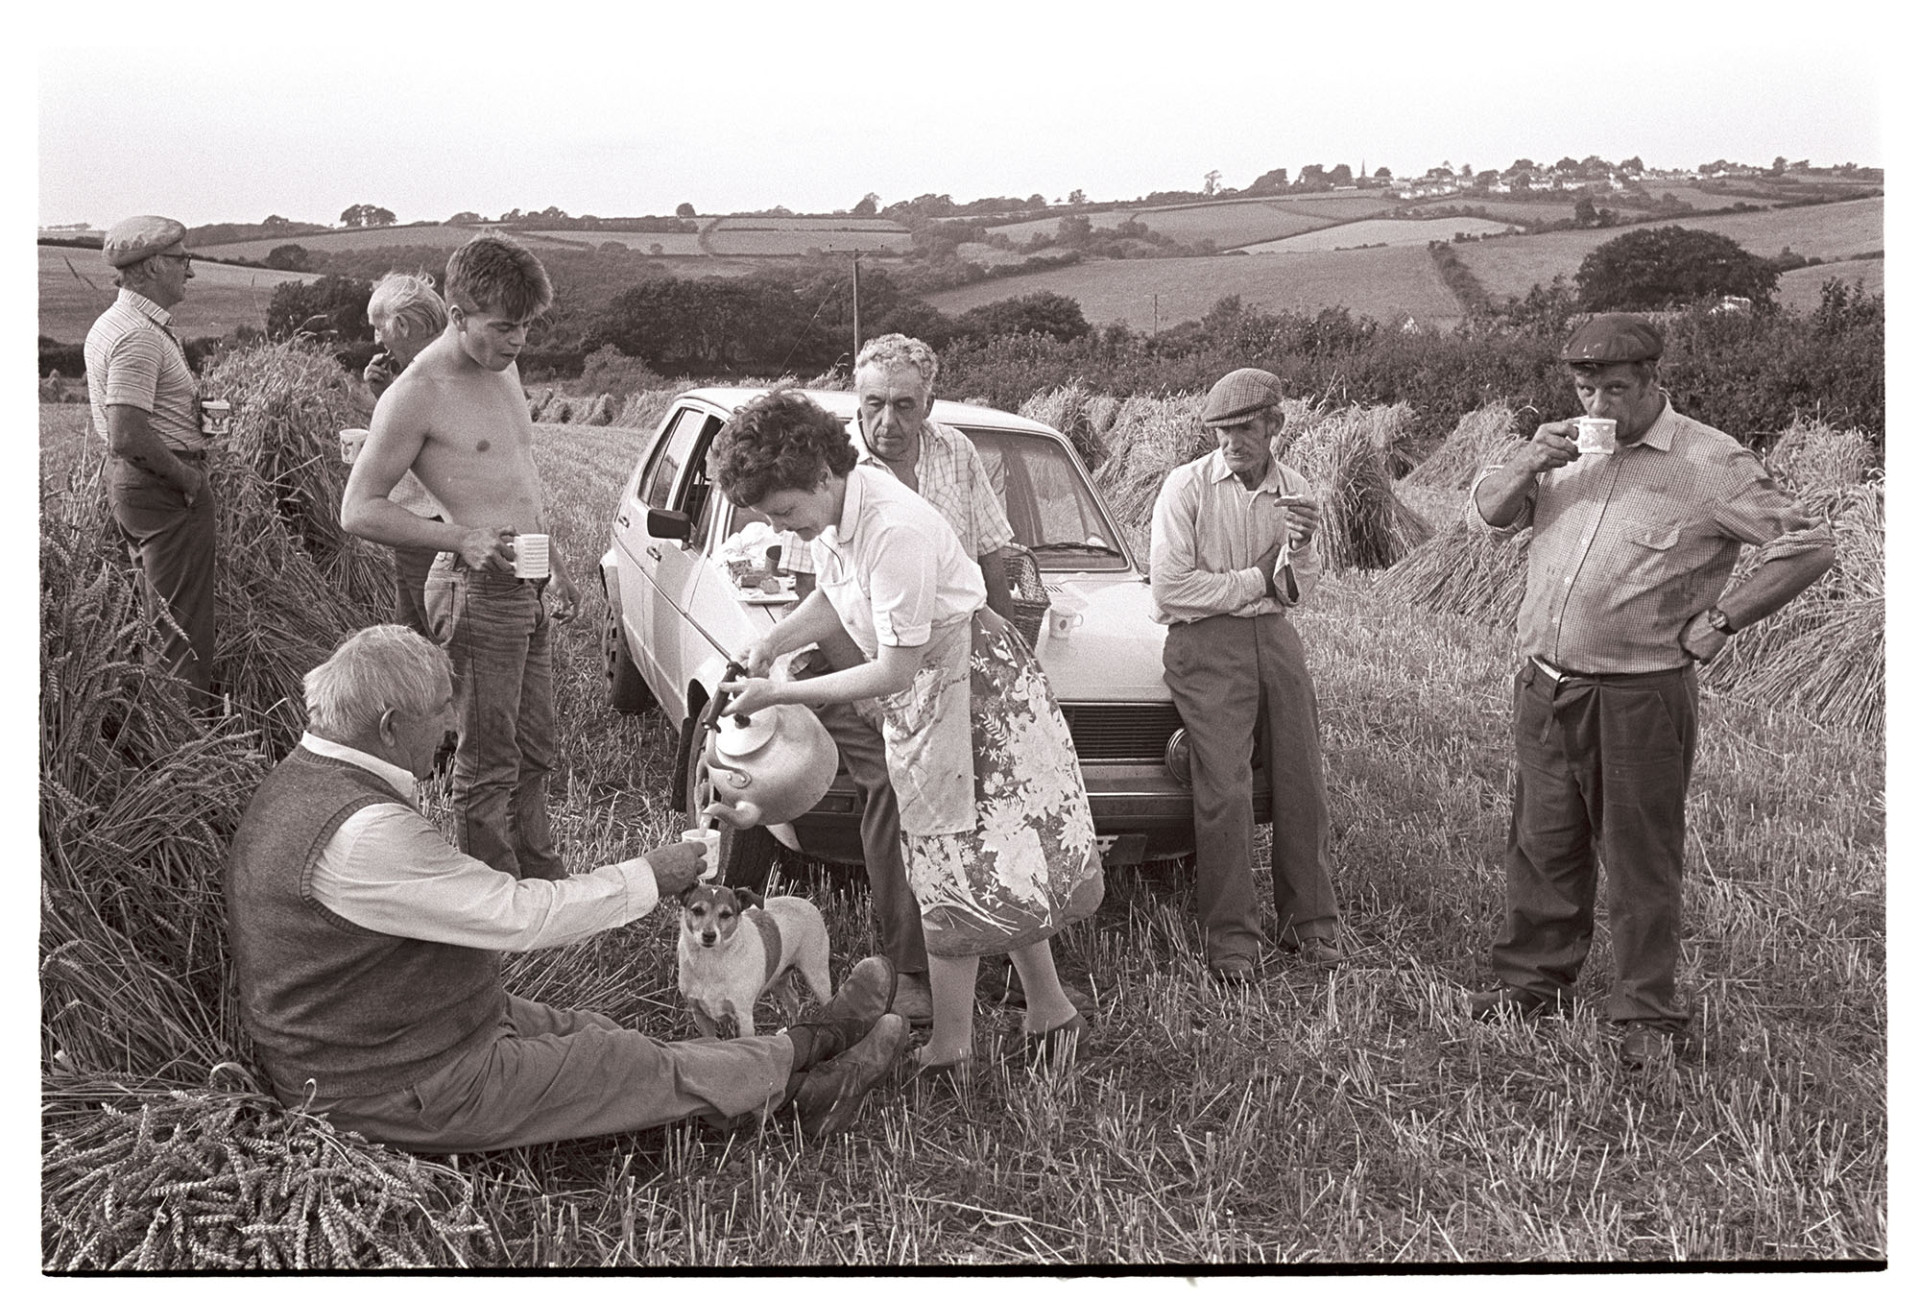 Harvesters tea break, leaning on car, woman, farmers wife pouring from kettle, dog. 
[A woman pouring tea for harvesters having a tea break at Spittle, Chulmleigh. They are resting by a car in a field. A basket with food is on the car bonnet and a dog is stood by the woman. Stooks of corn can be seen in the background.]